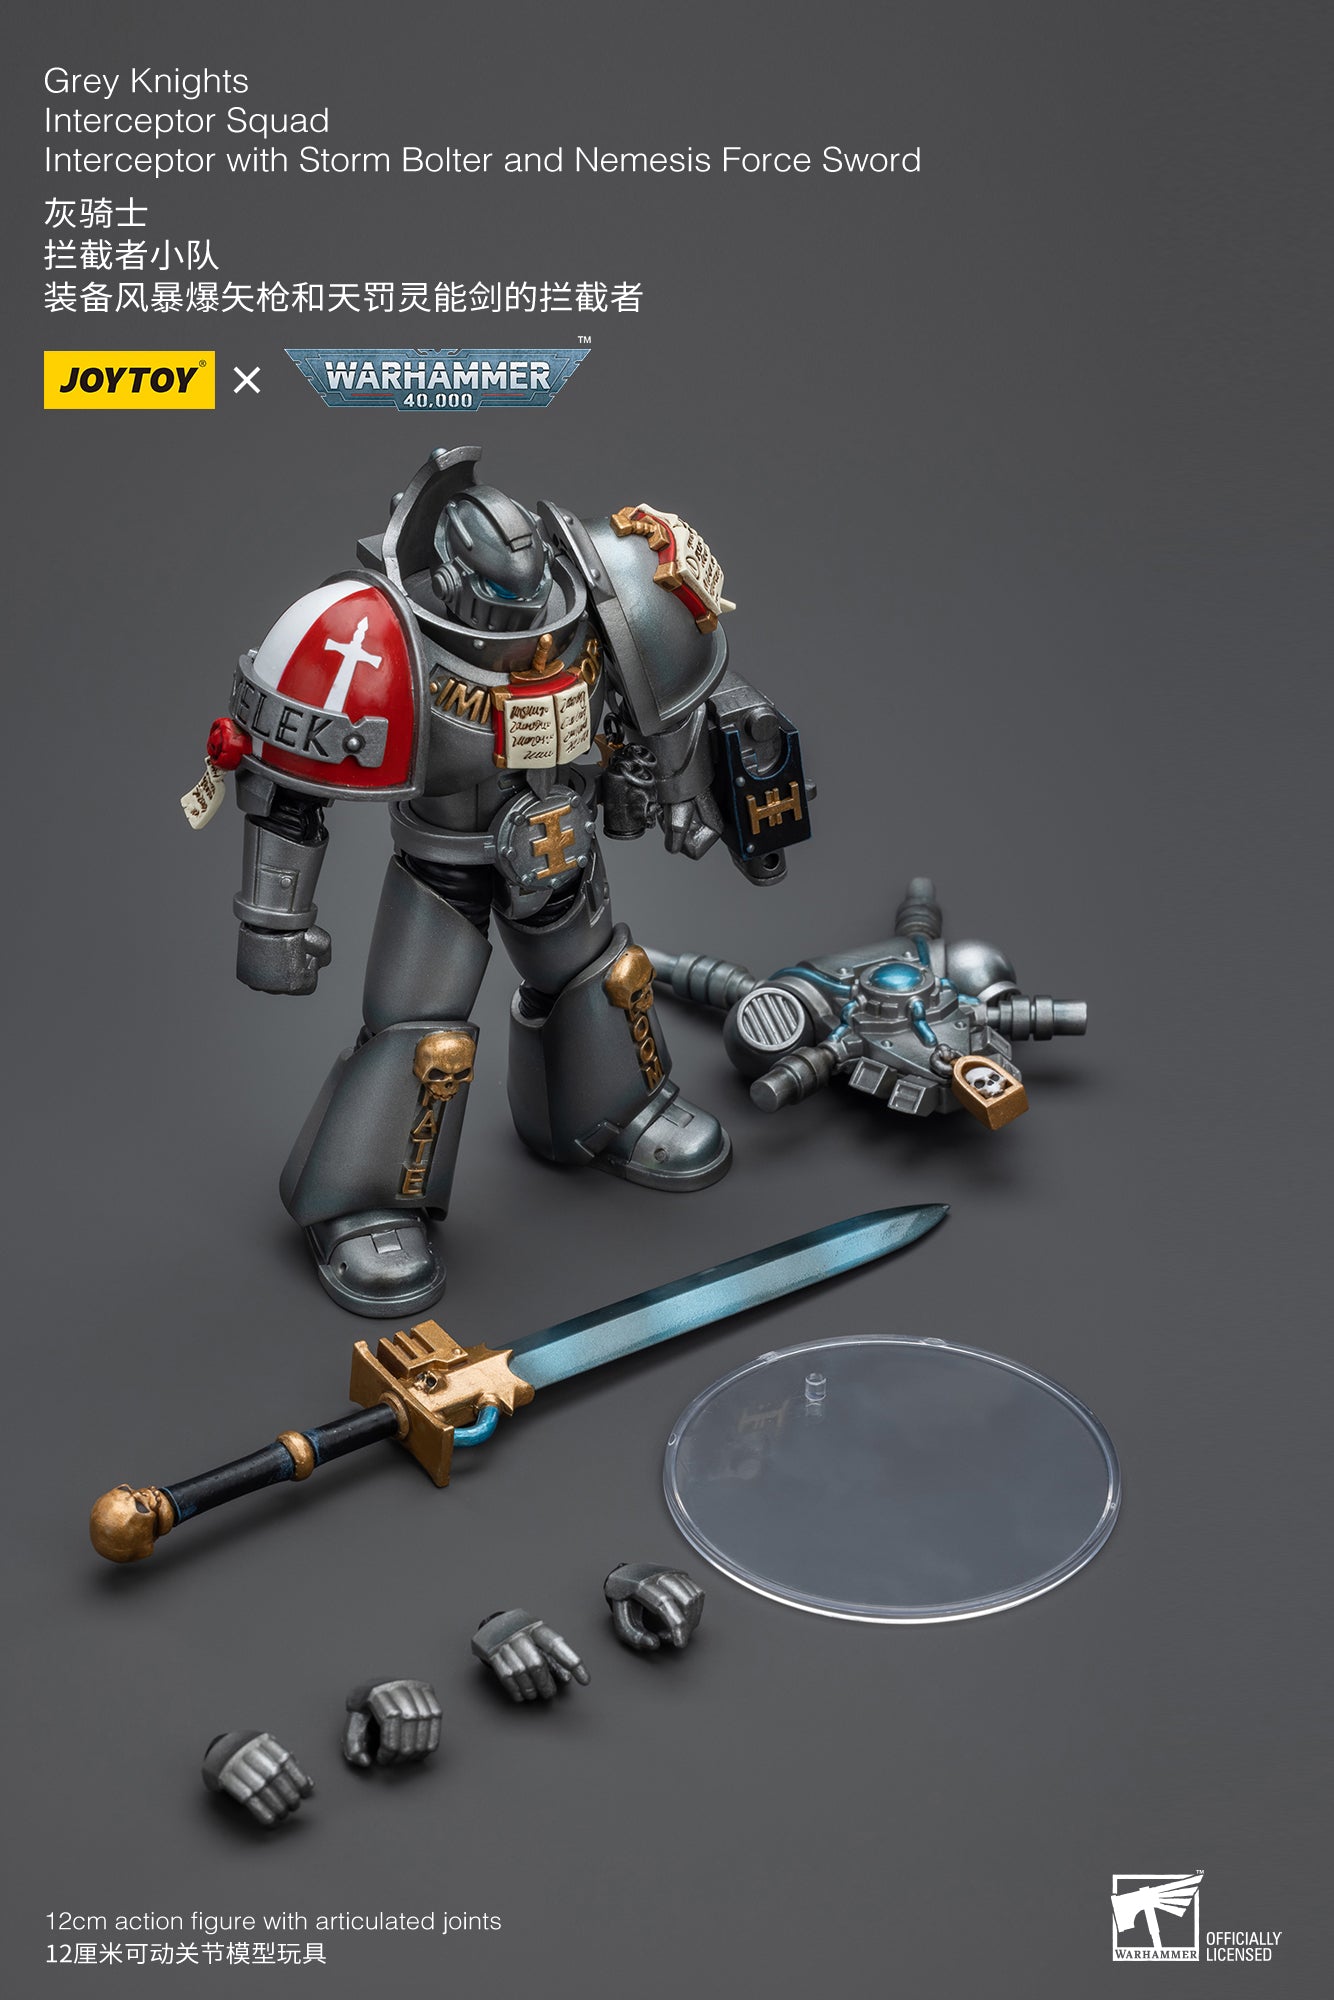 Warhammer 40k: Grey Knights: Interceptor with Storm Bolter and Nemesis Force Sword-Joy Toy